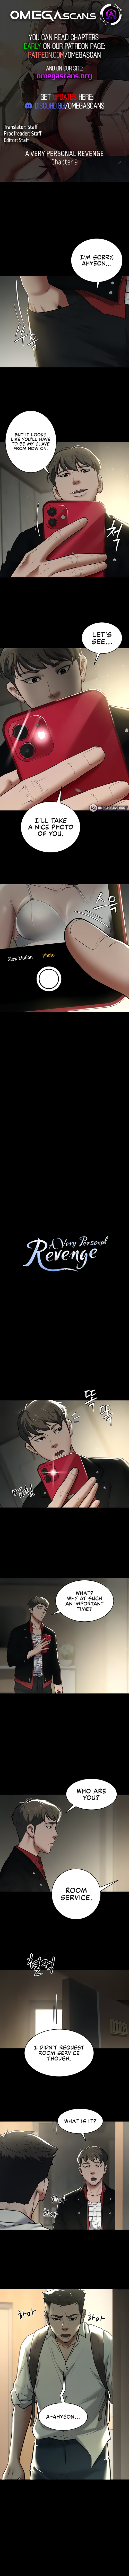 A Very Personal Revenge NEW image